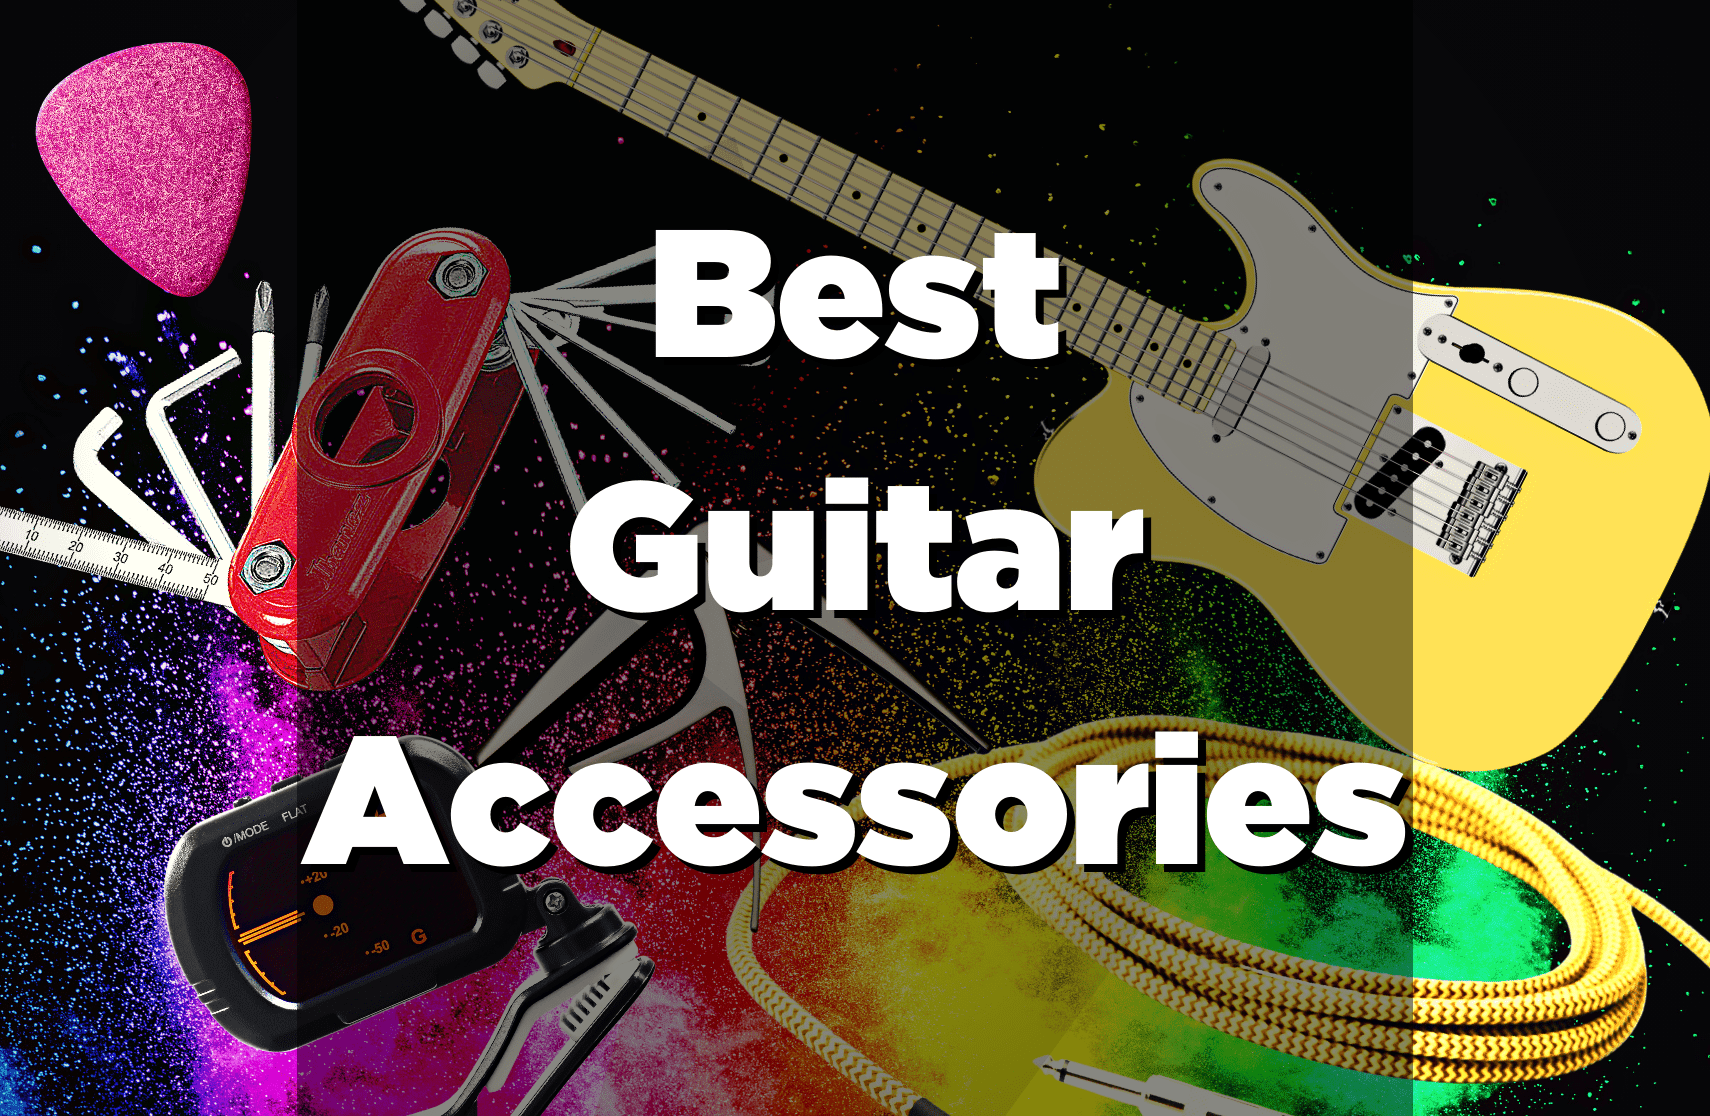 Tung lastbil Udover Dolke 30 Best Guitar Accessories You Will Use Every Day